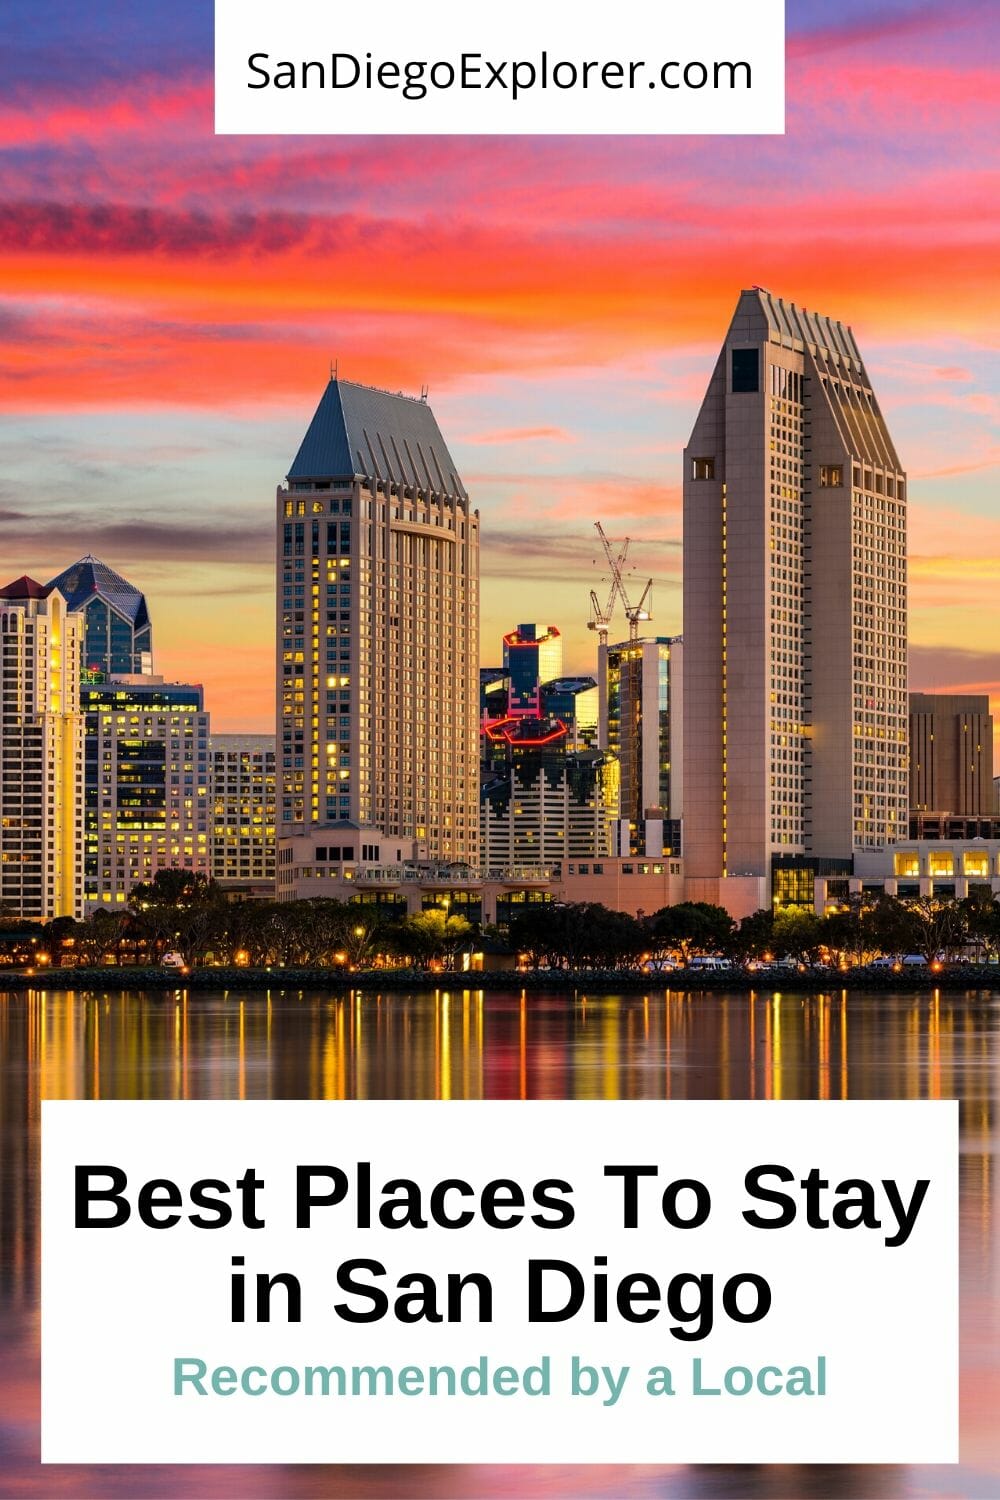 Where to Stay in San Diego - Ultimate Neighborhood Guide by a Local